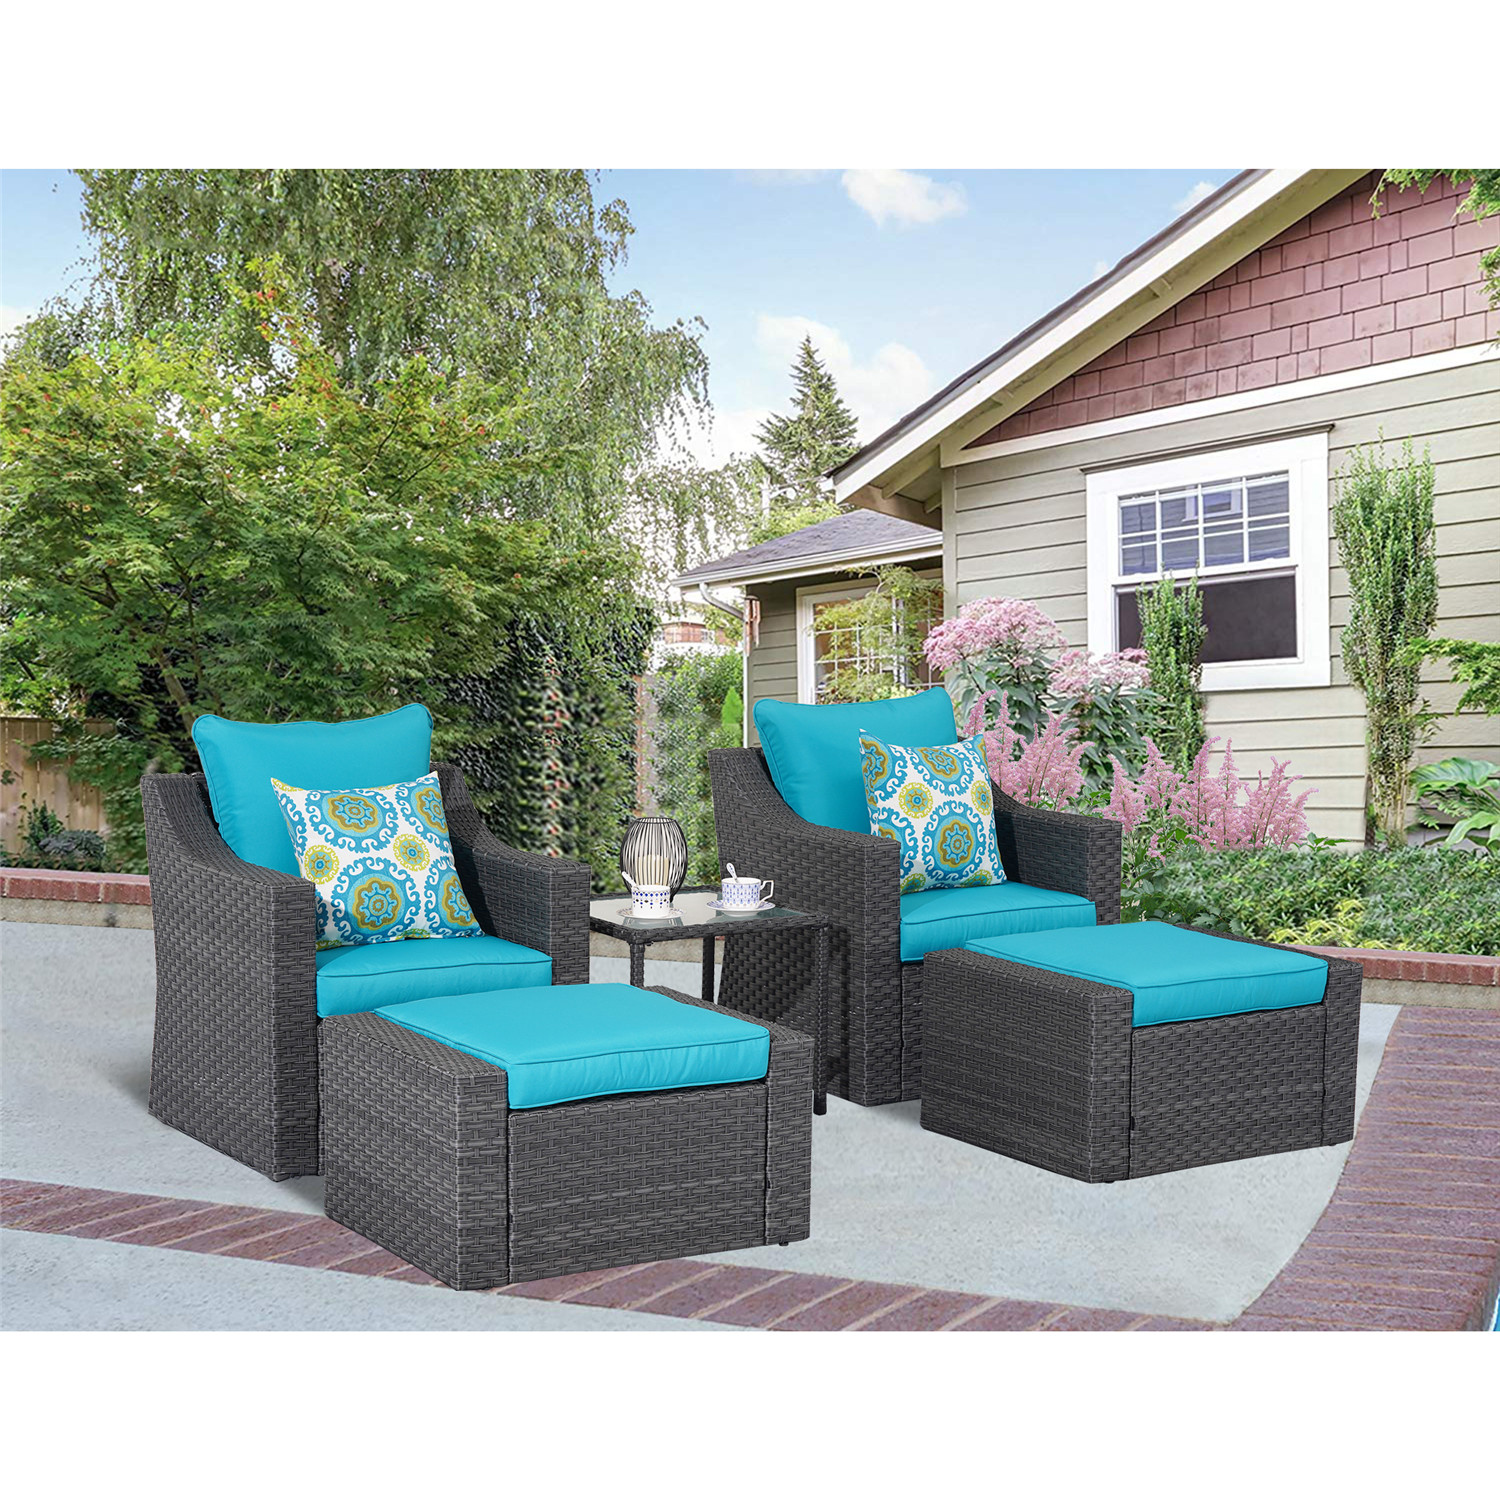 Superjoe 5 Pcs Outdoor Patio Furniture Set All Weather PE Rattan Wicker Chairs with Ottomans and Side Table,Blue - image 3 of 7